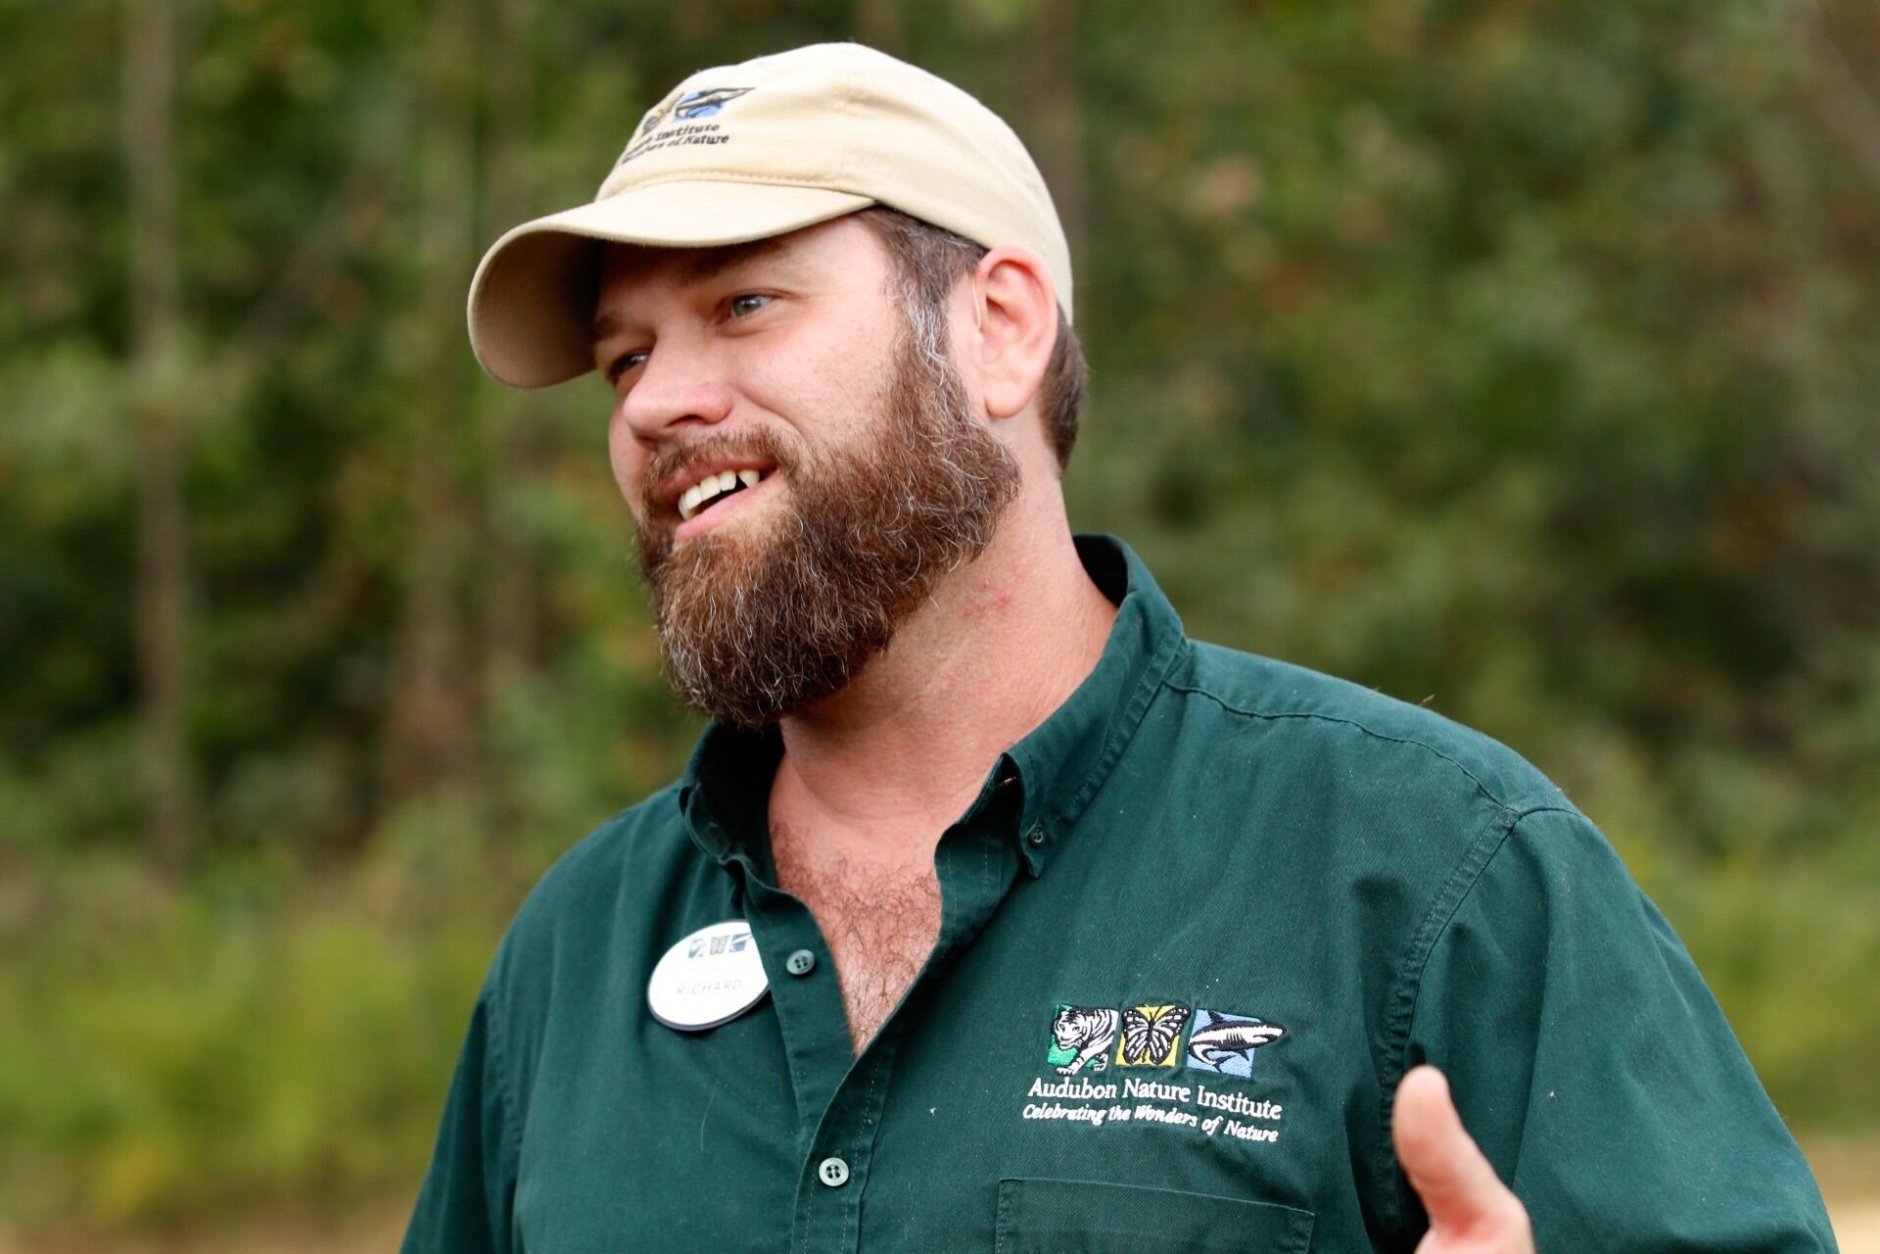 Richard Dunn, Assistant Curator at the Audubon Nature Institute Species Survival Center in New Orleans, Louisiana. The Institute will be among the recipients of some of Patuxent’s whooping cranes. (WTOP/Kate Ryan)